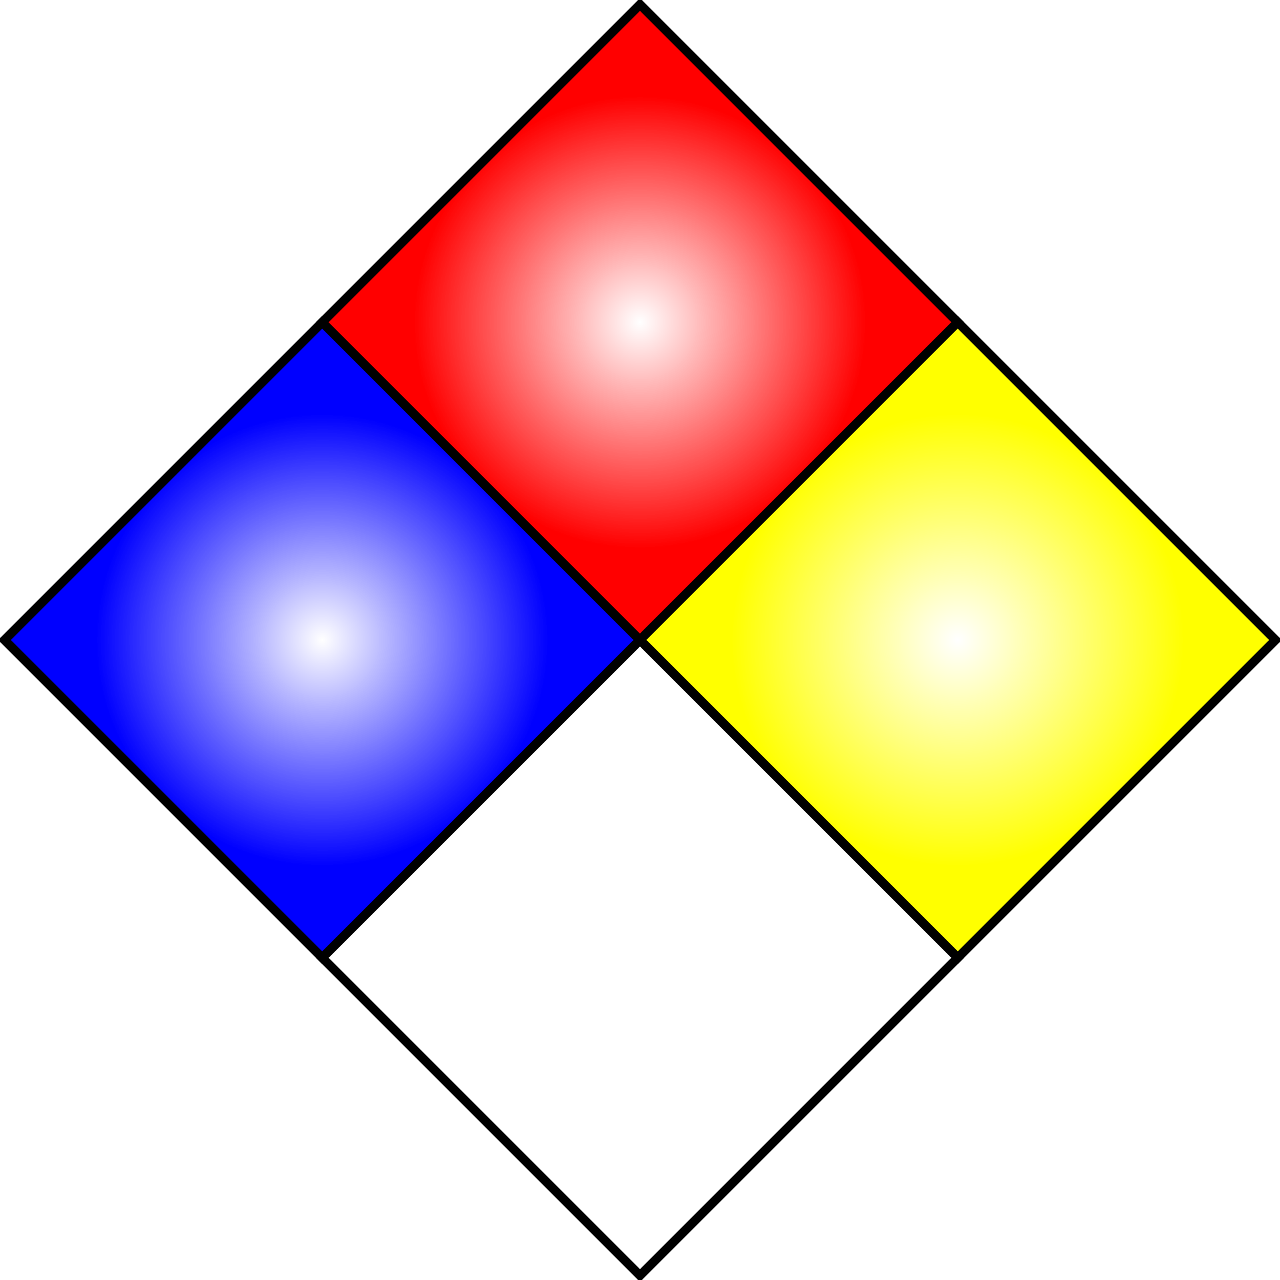 a red, yellow, and blue diamond on a black background, a picture, inspired by Mondrian, flickr, de stijl, hazmat, reddit vexillology, 2 tone colors only, colorful signs